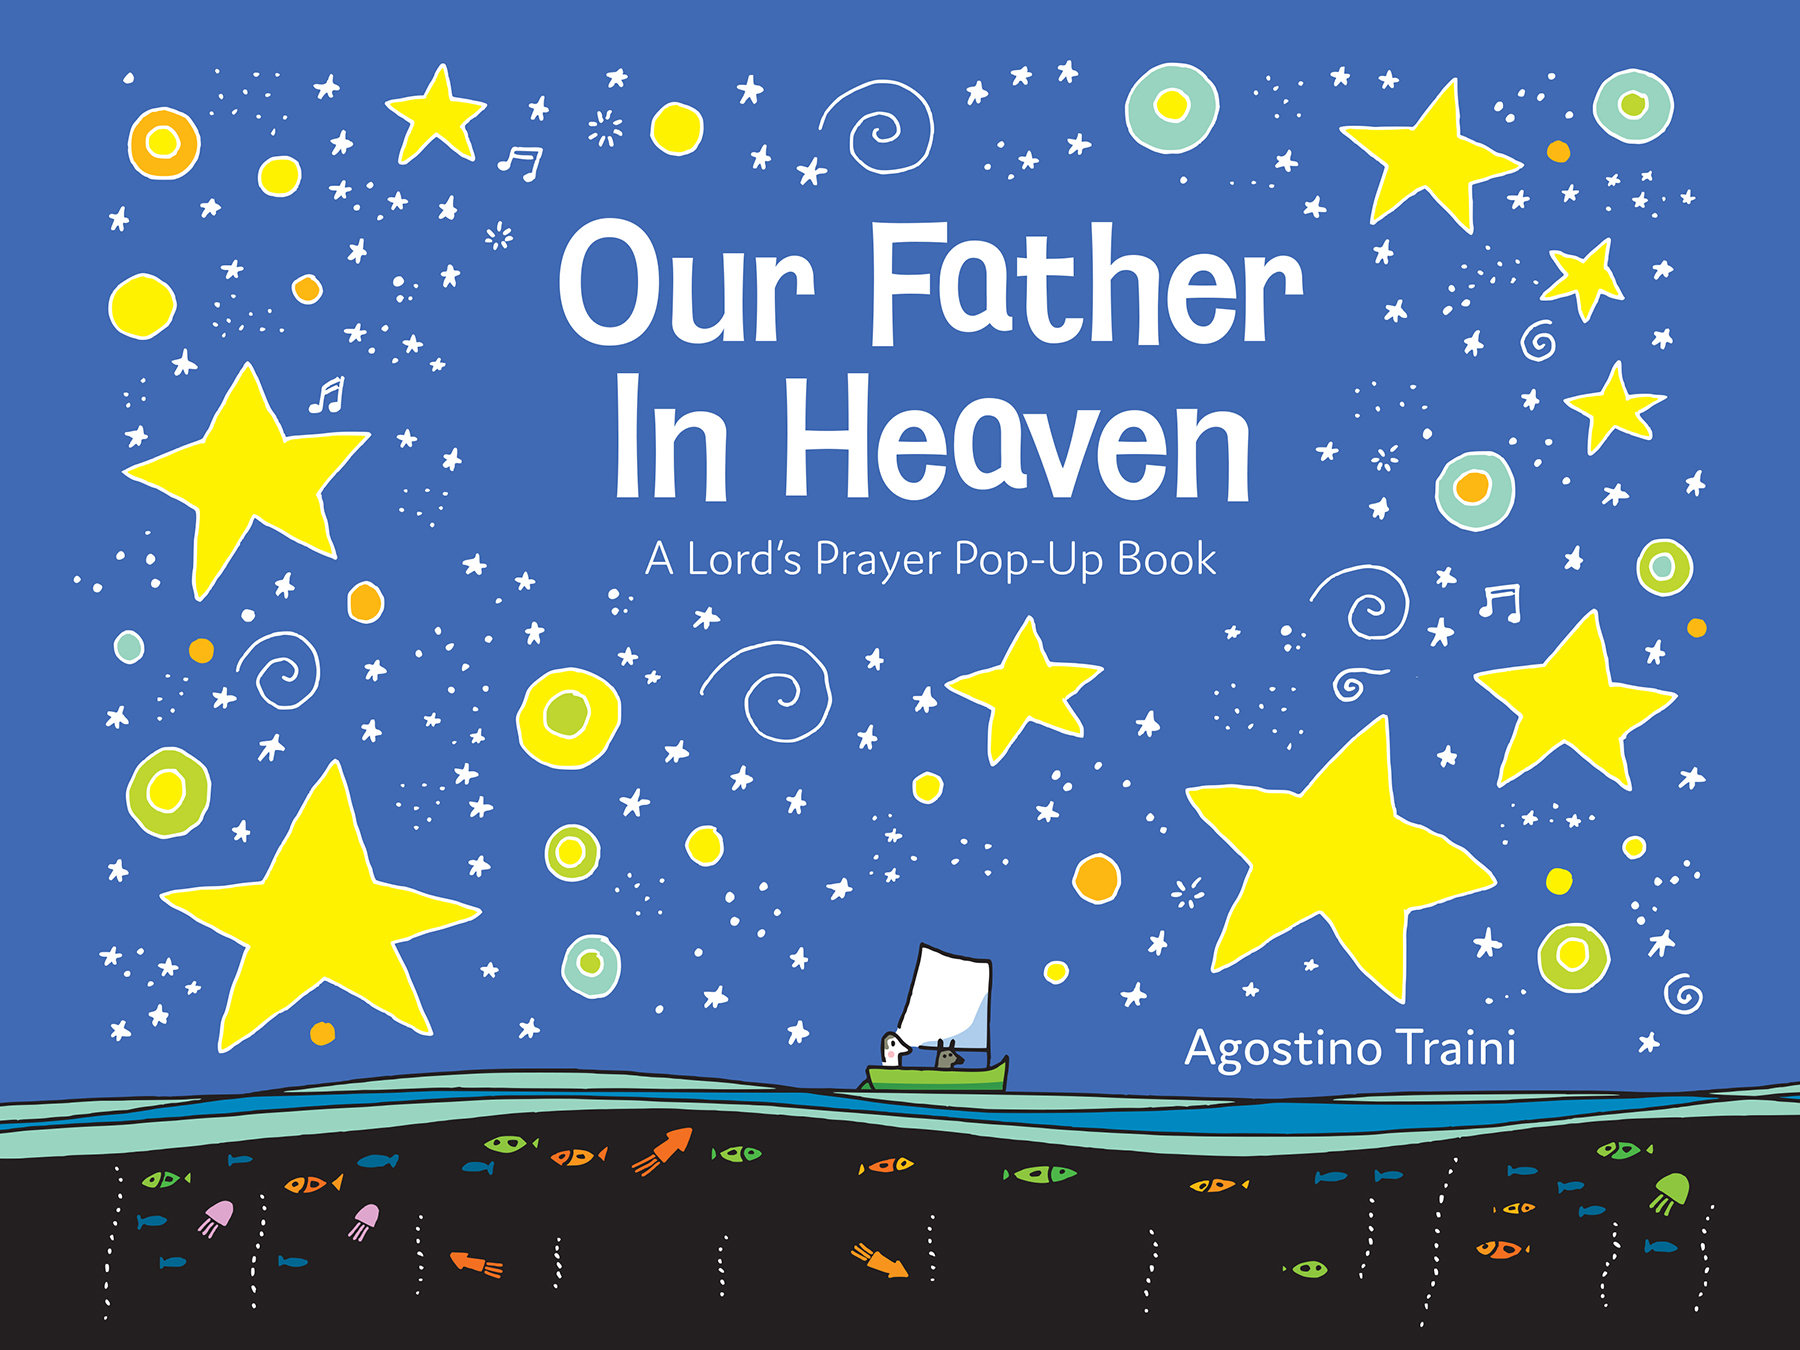 Our Father in Heaven: A Lord's Prayer Pop-Up Book